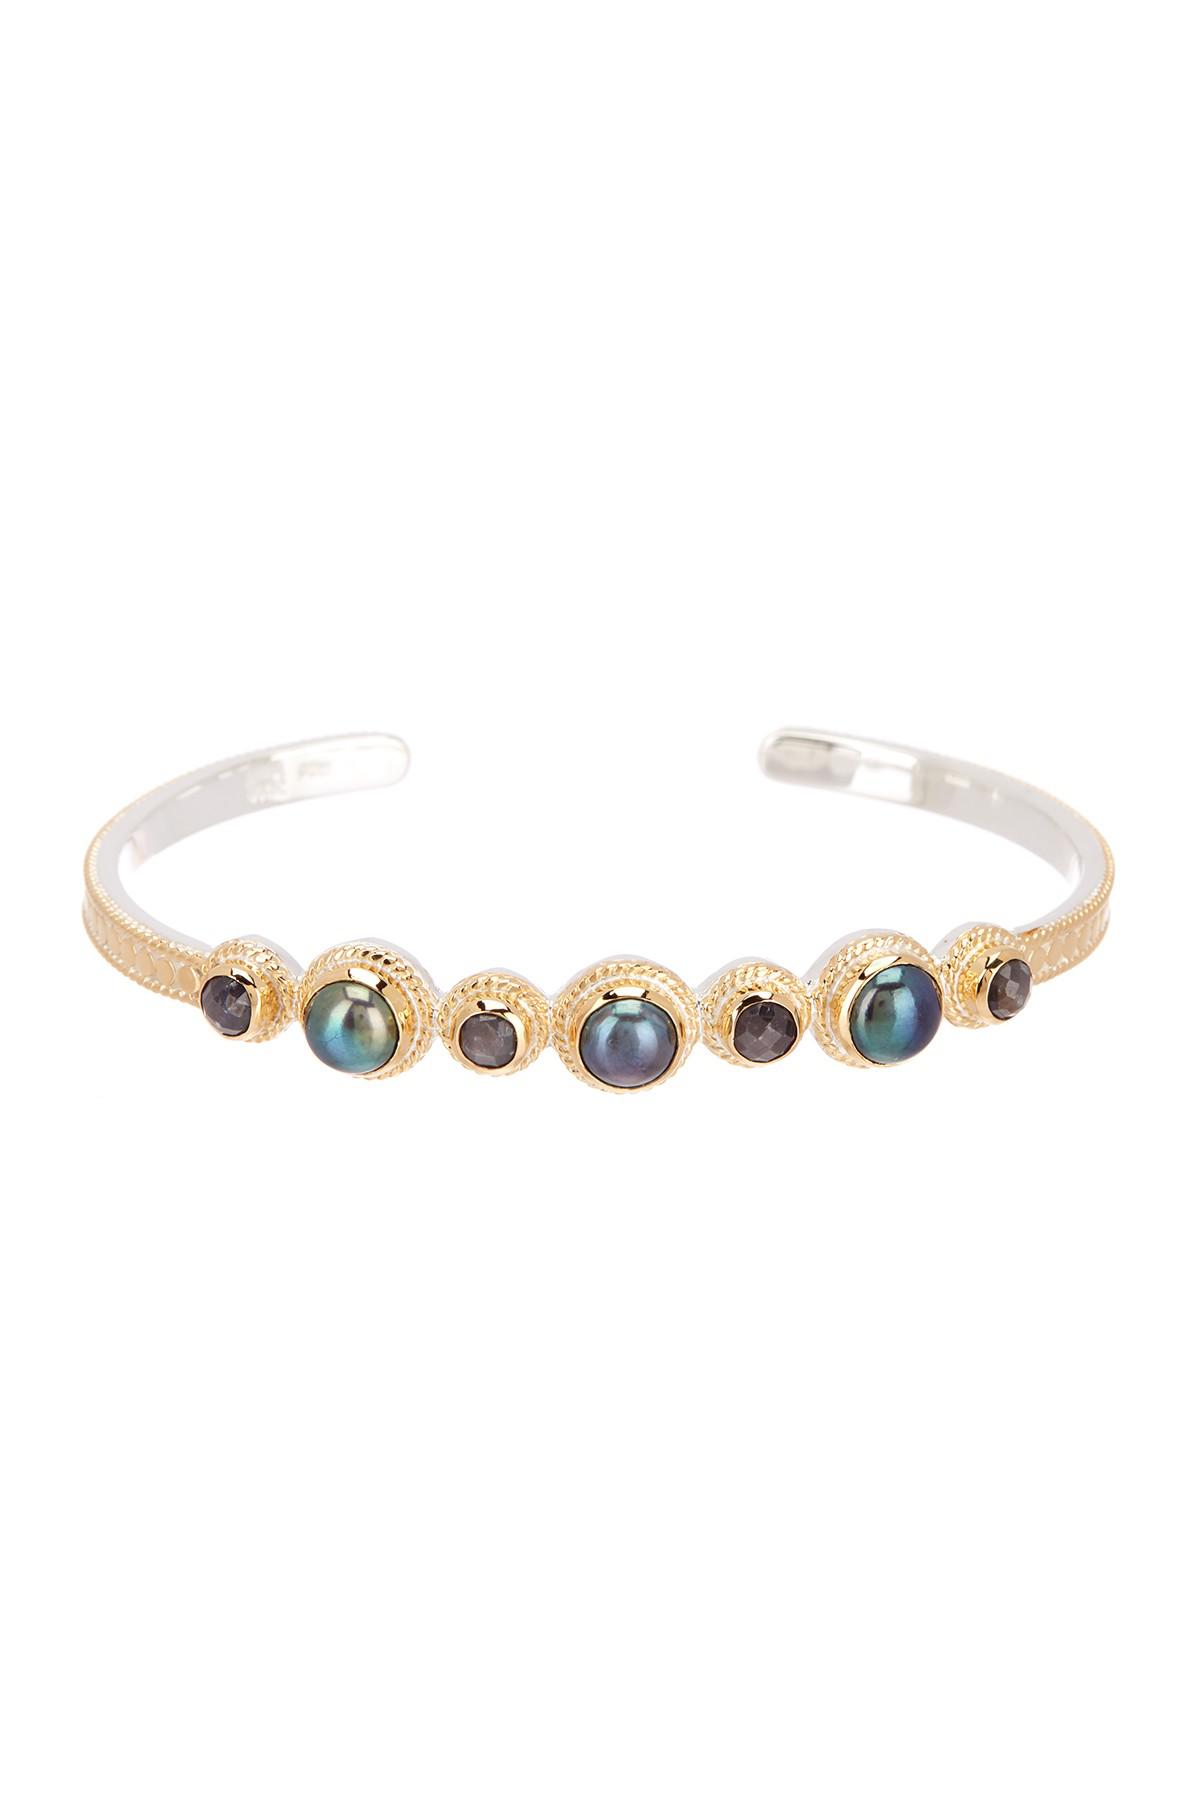 Anna Beck Two Tone 7mm Simulated Blue Pearl Grey Sapphire Cuff Bracelet